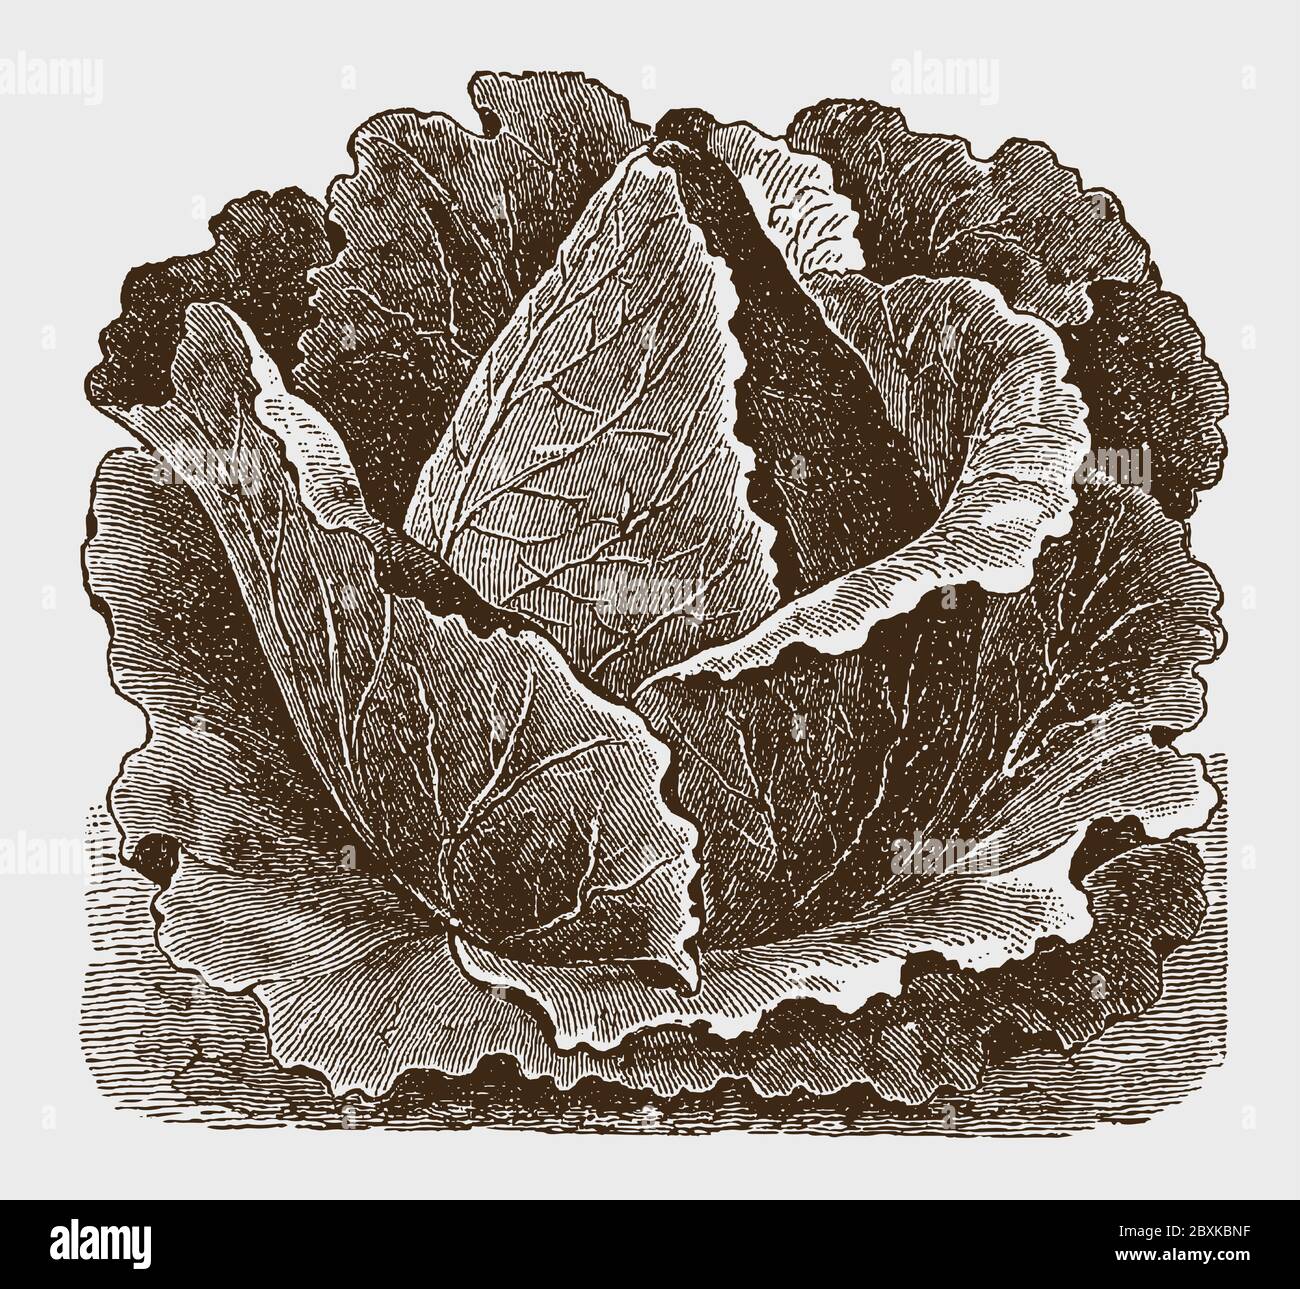 Pointed cabbage cultivar, after a historical engraving from the early 20th century Stock Vector